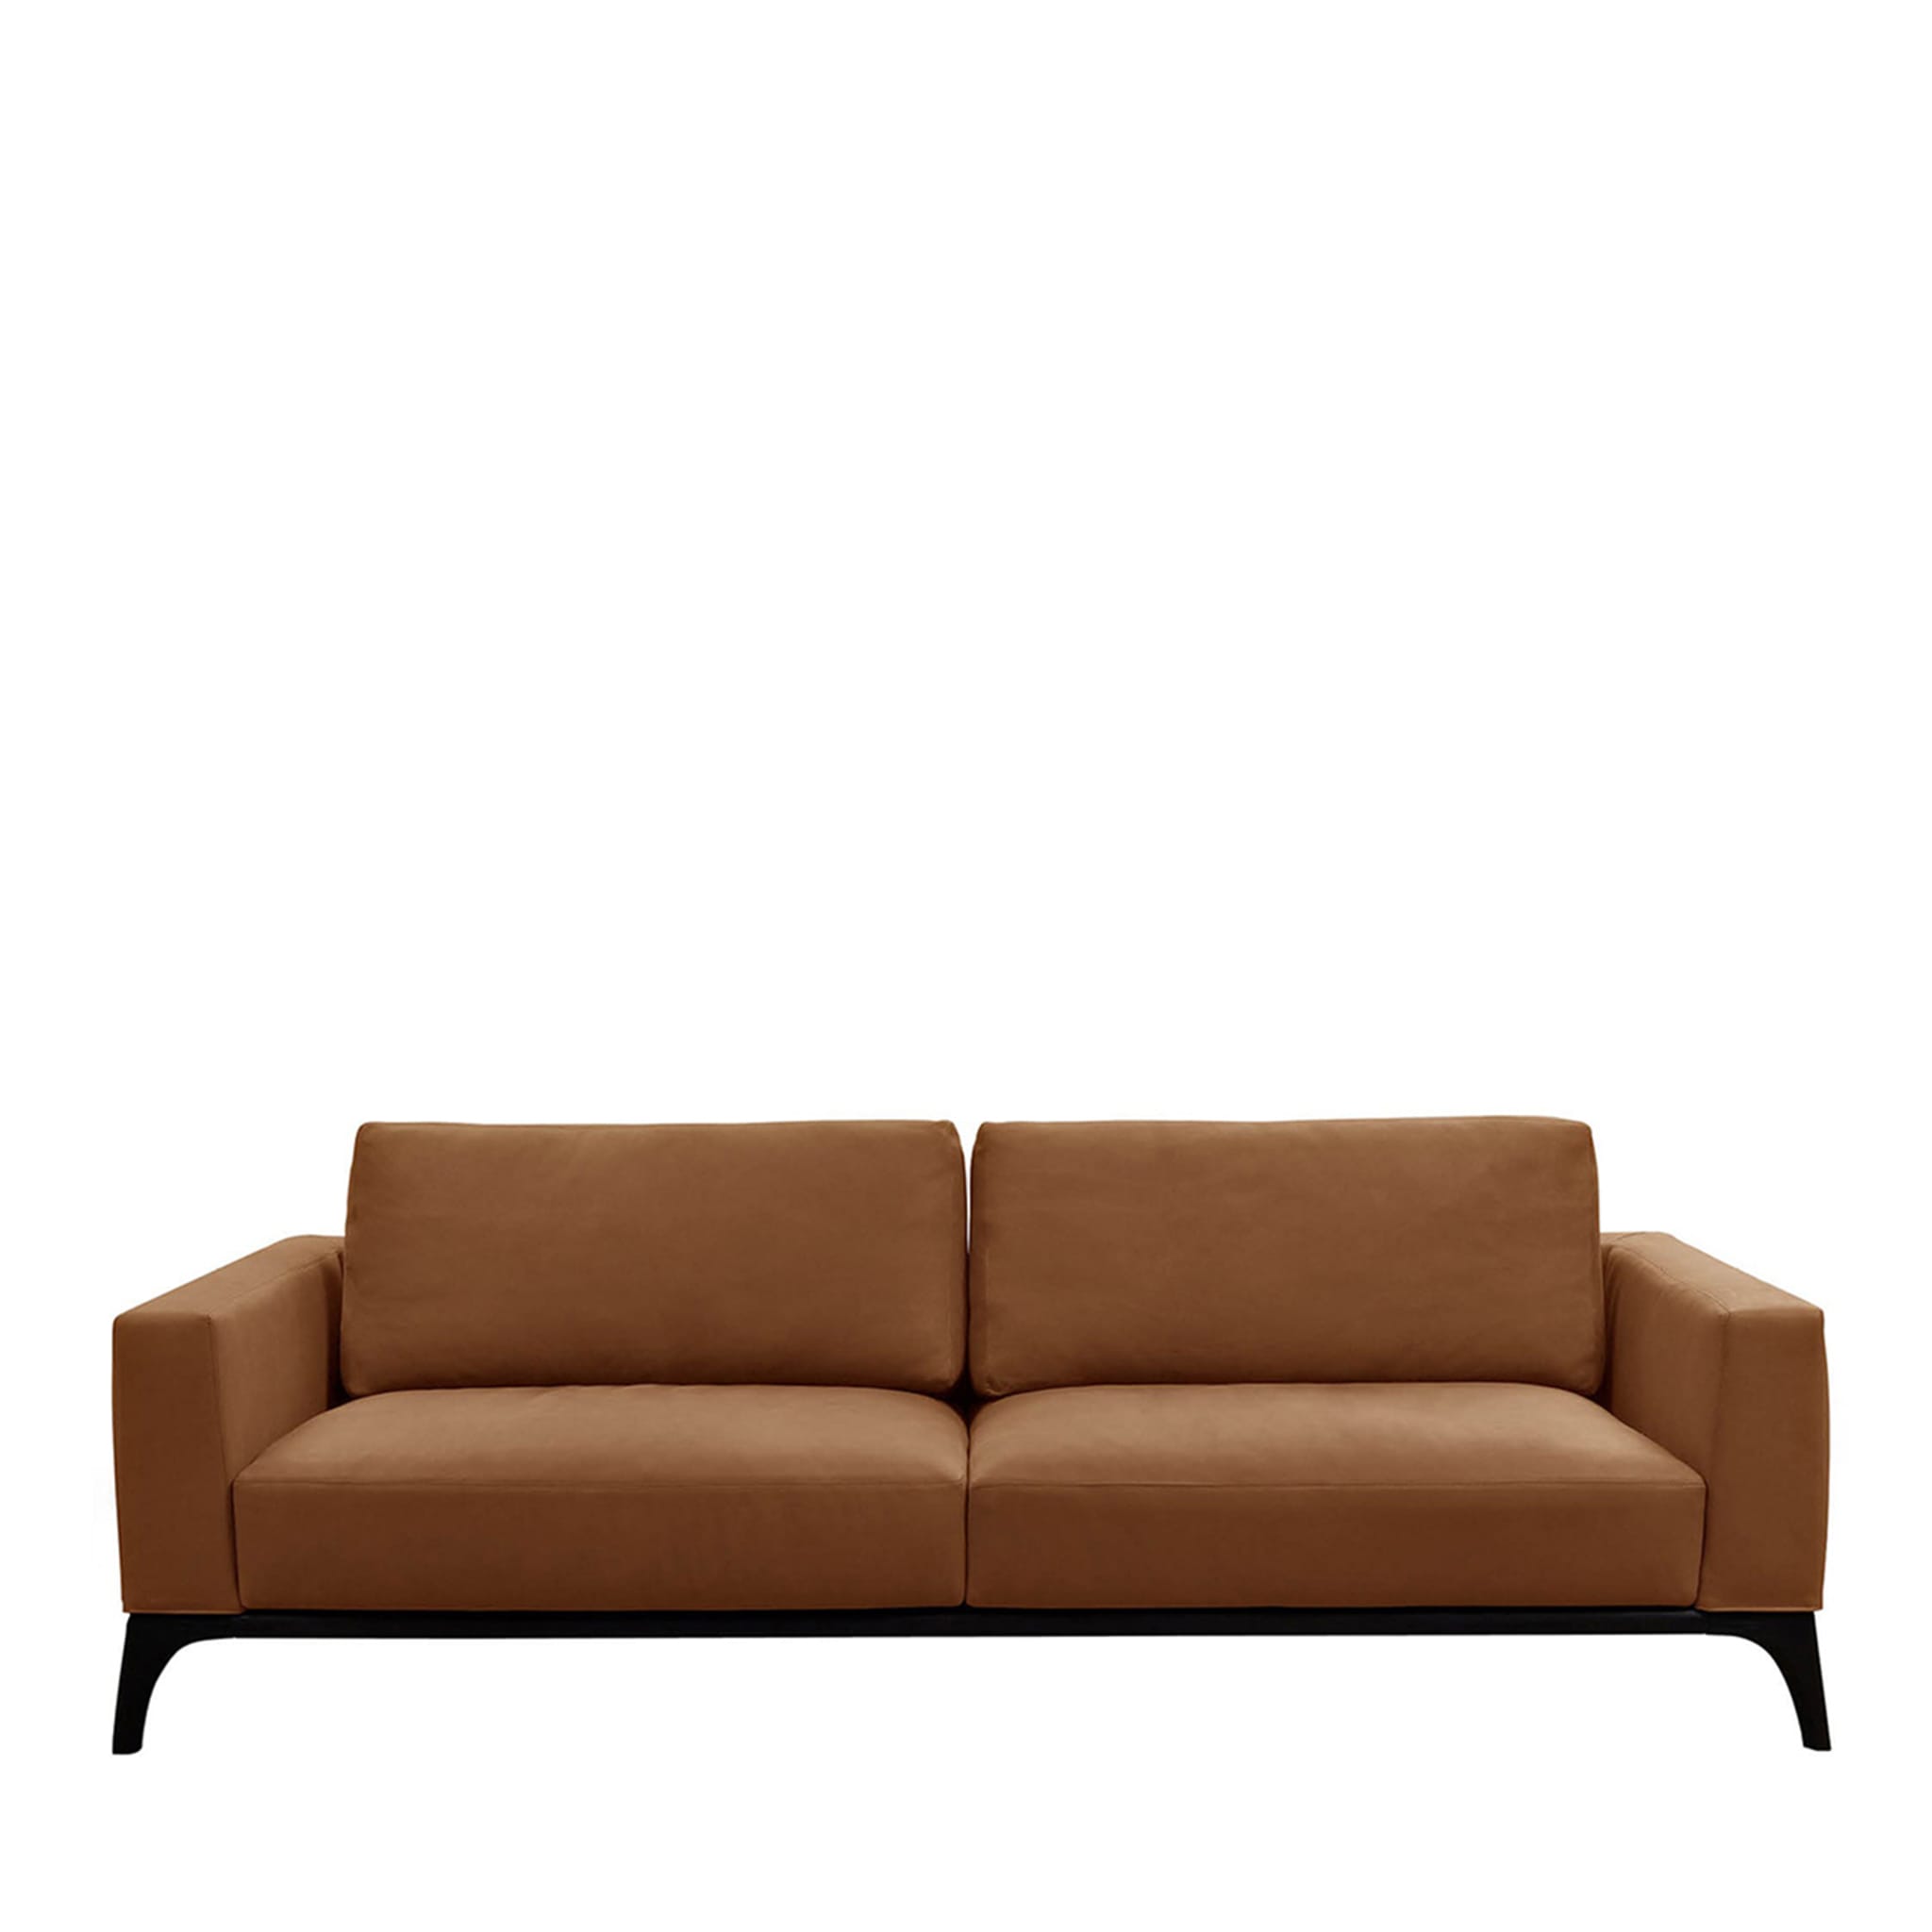 Milano Cookie-Brown Leather Sofa by Giuseppe Manzoni - Main view